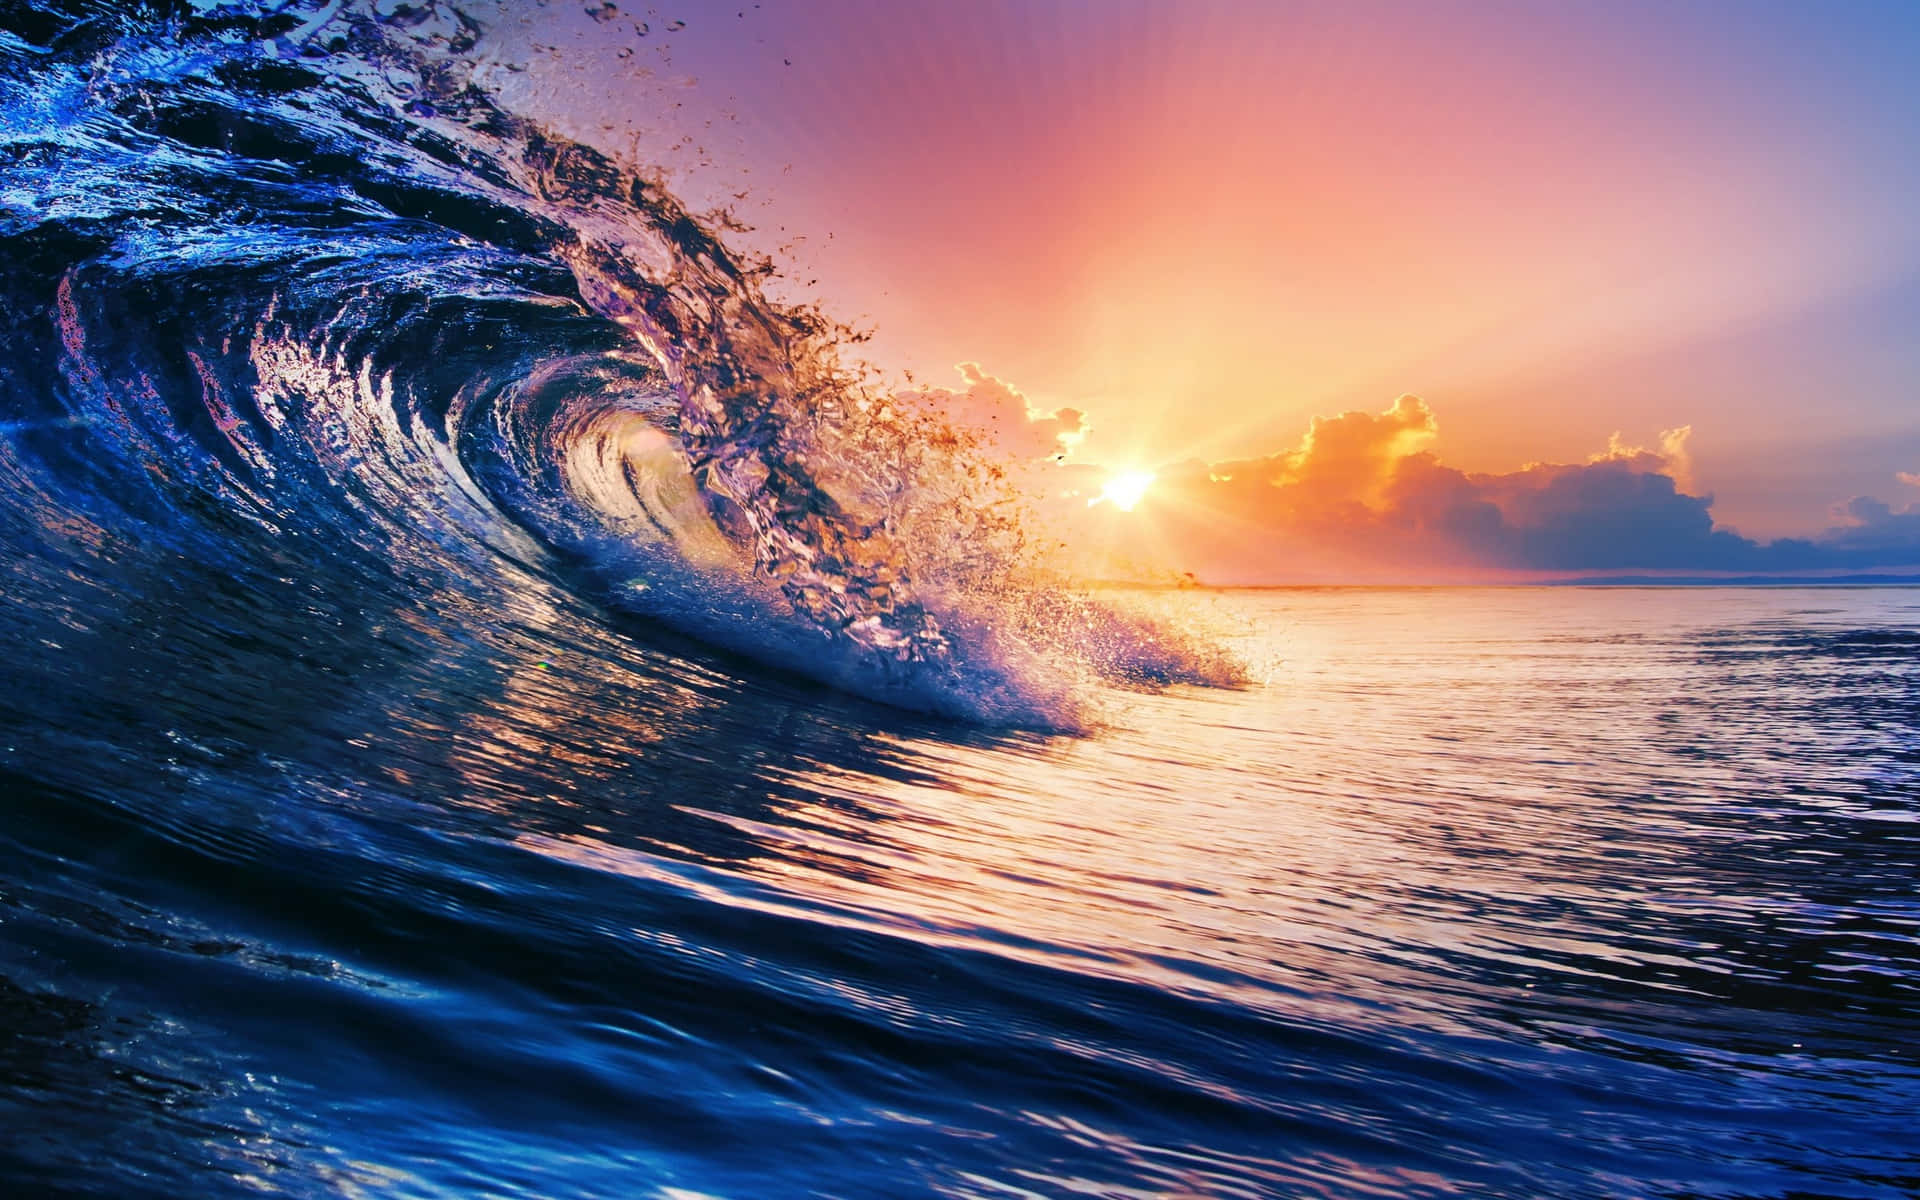 Mesmerizing ocean sunset with vibrant hues